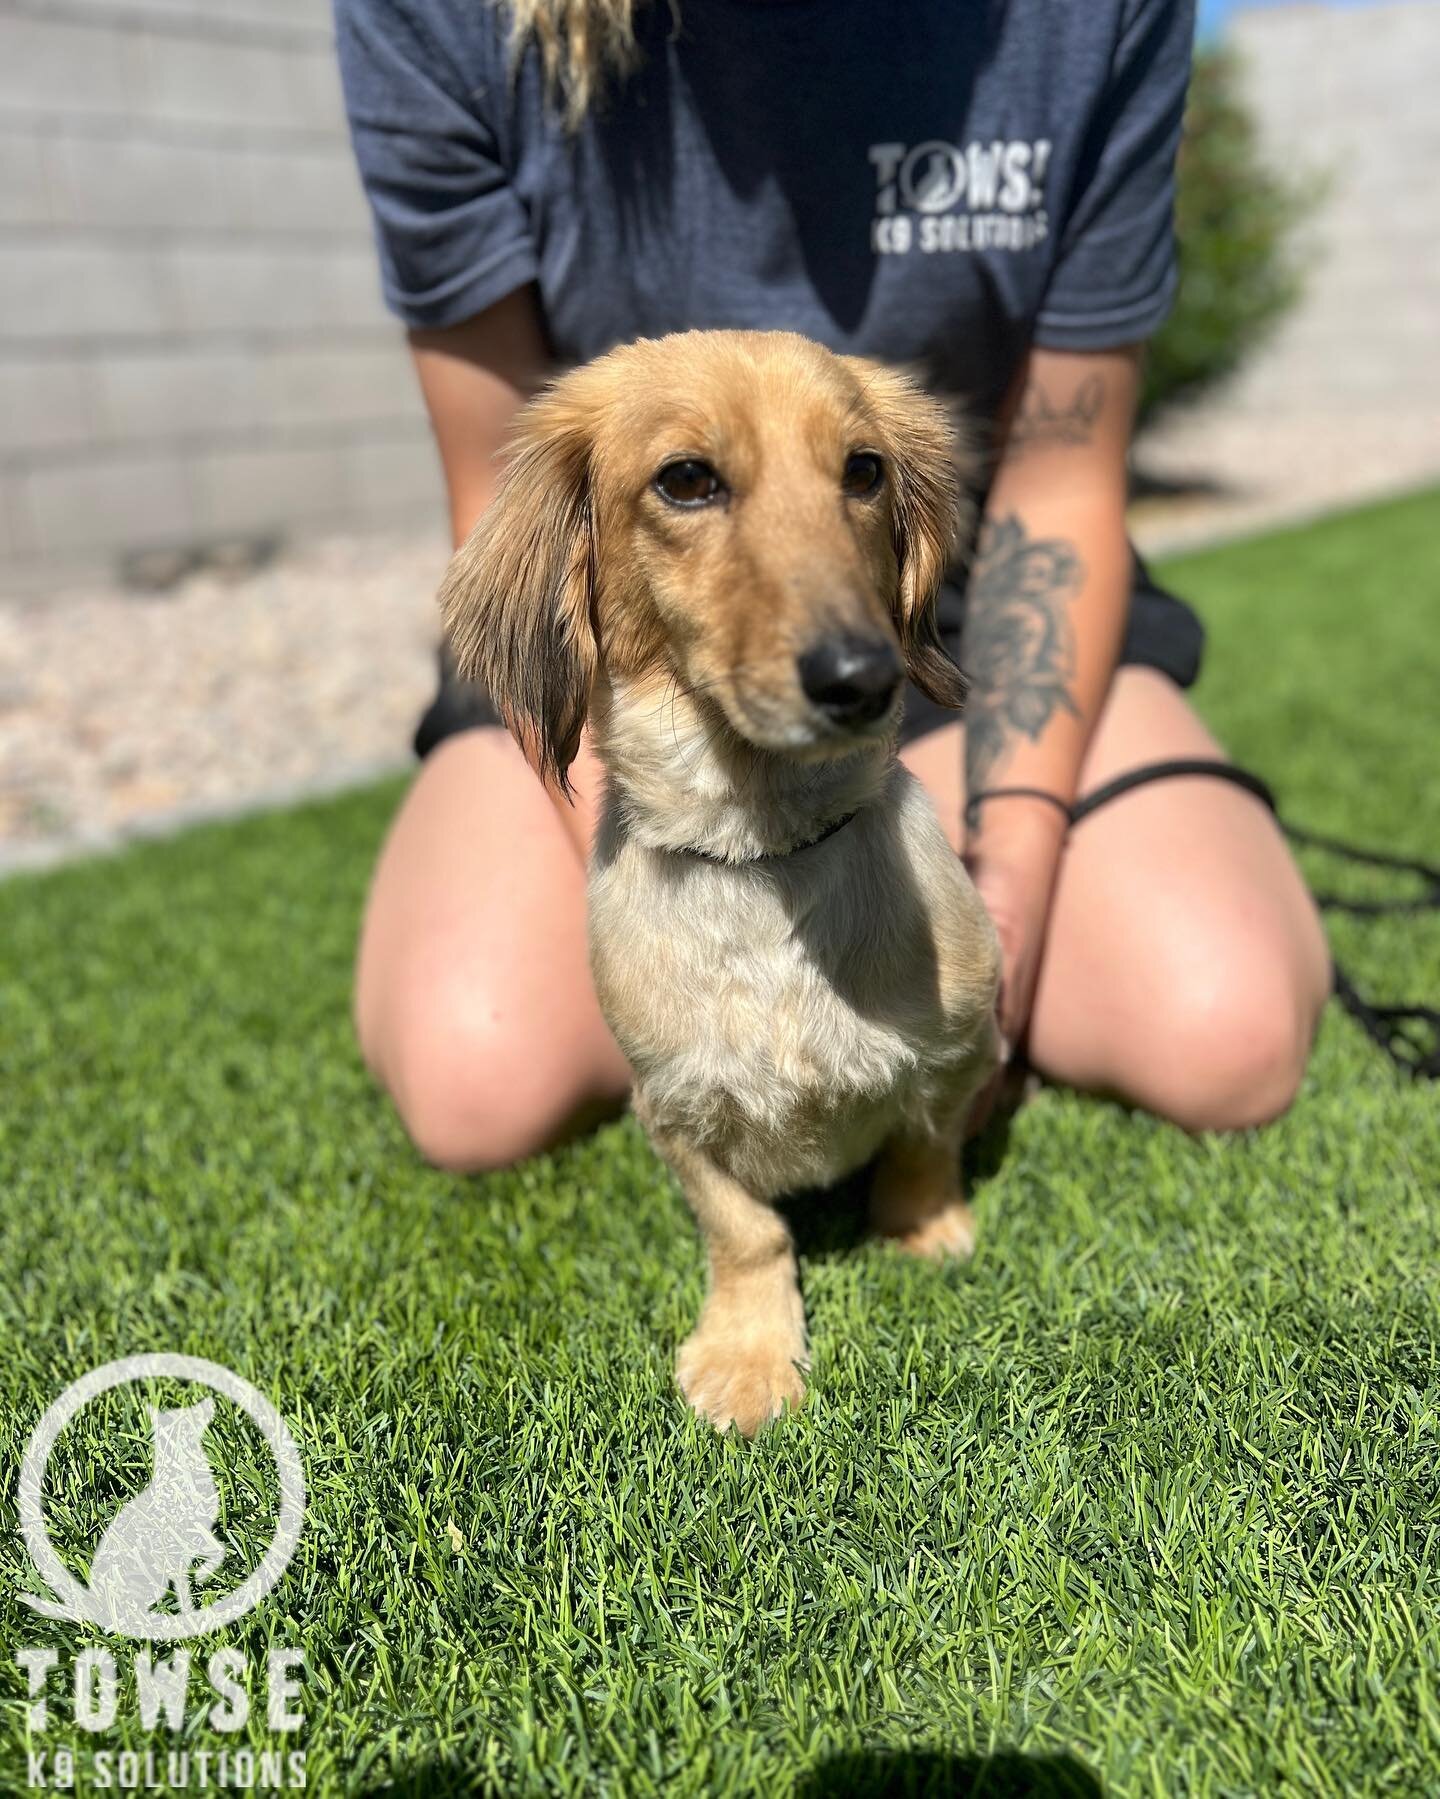 Poseidon has arrived today for board &amp; train! He is a 3 year old Dachshund and is Zeus&rsquo; housemate. Both him and his brother are here to build confidence, learn impulse control when it comes to barking and overall manners in the home. Welcom